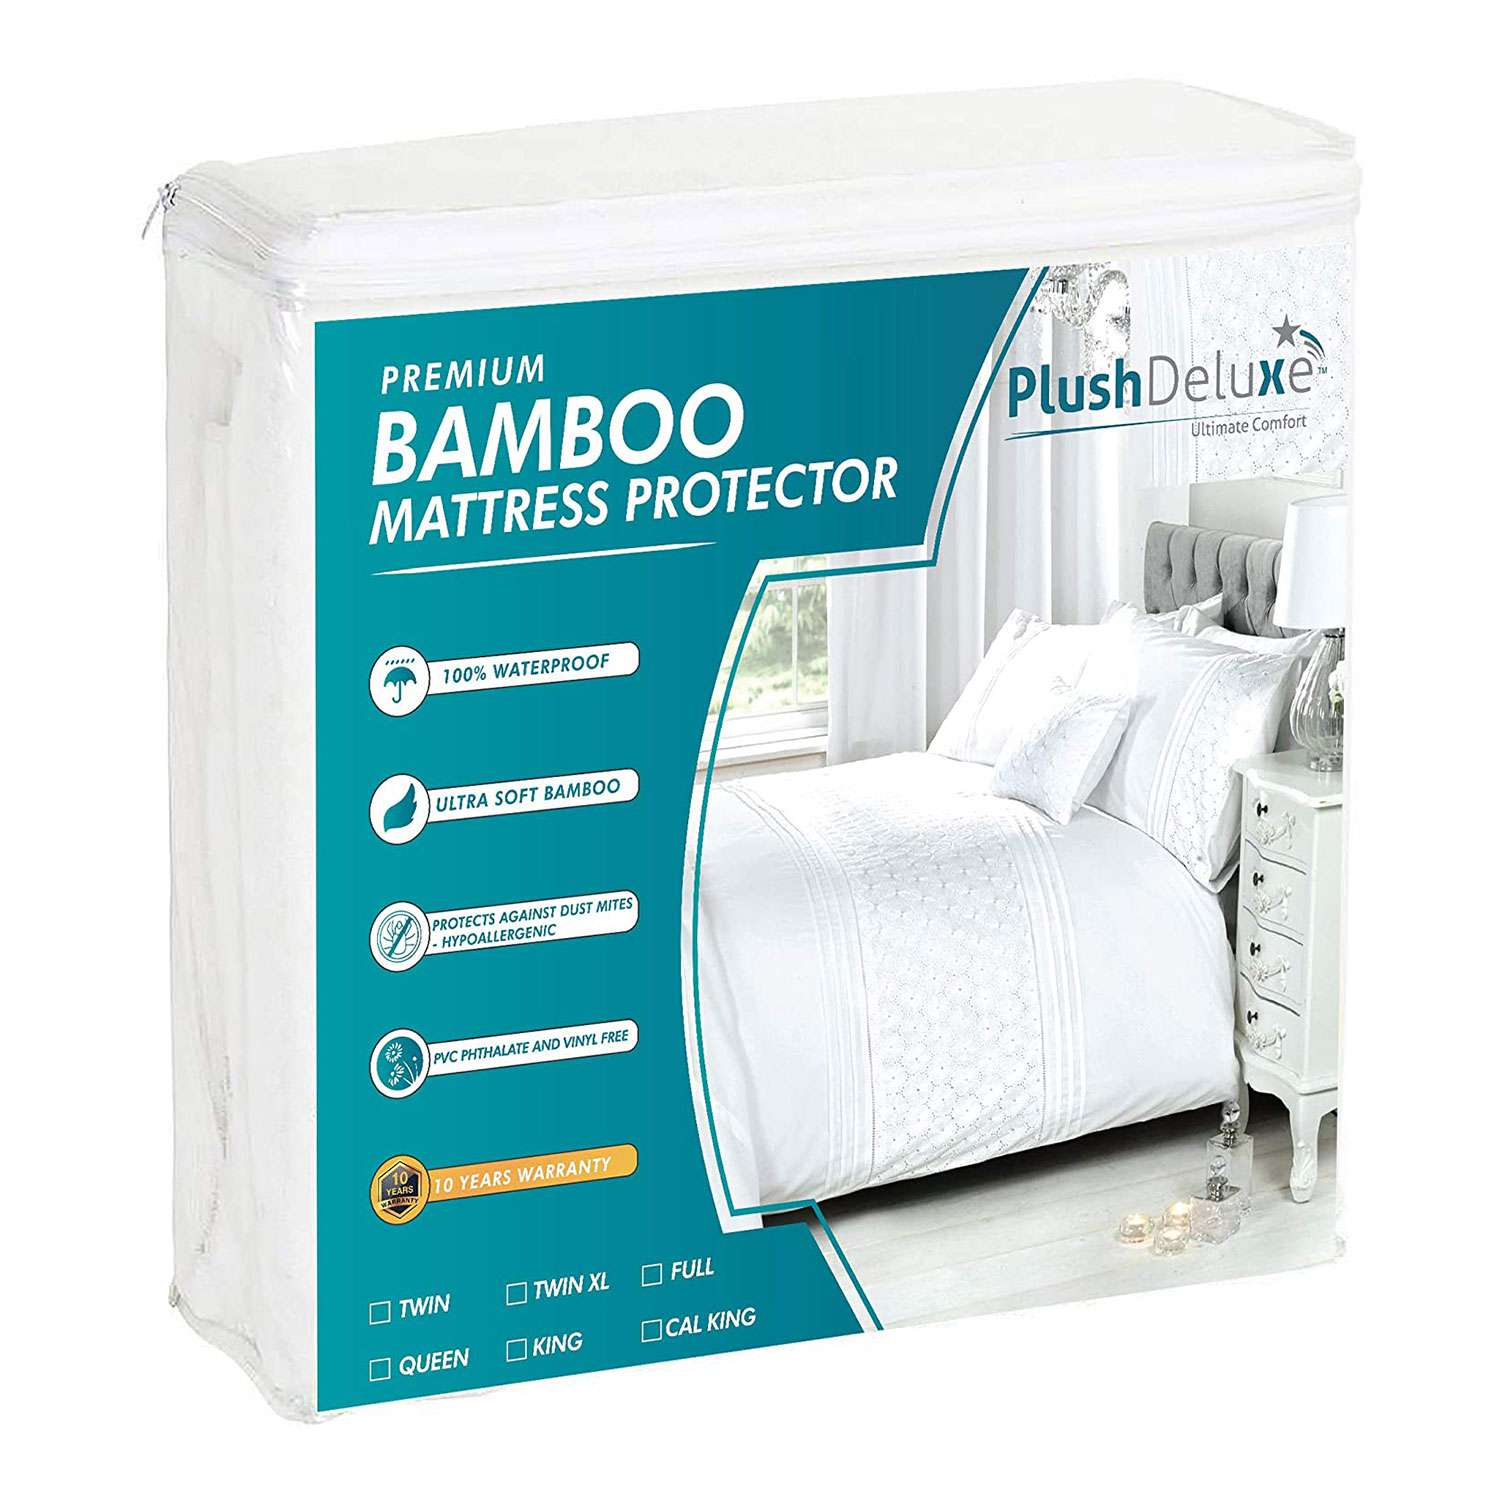 NEW SILENTNIGHT MATTRESS PROTECTOR WATERPROOF BED SHEETS SINGLE DOUBLE KING